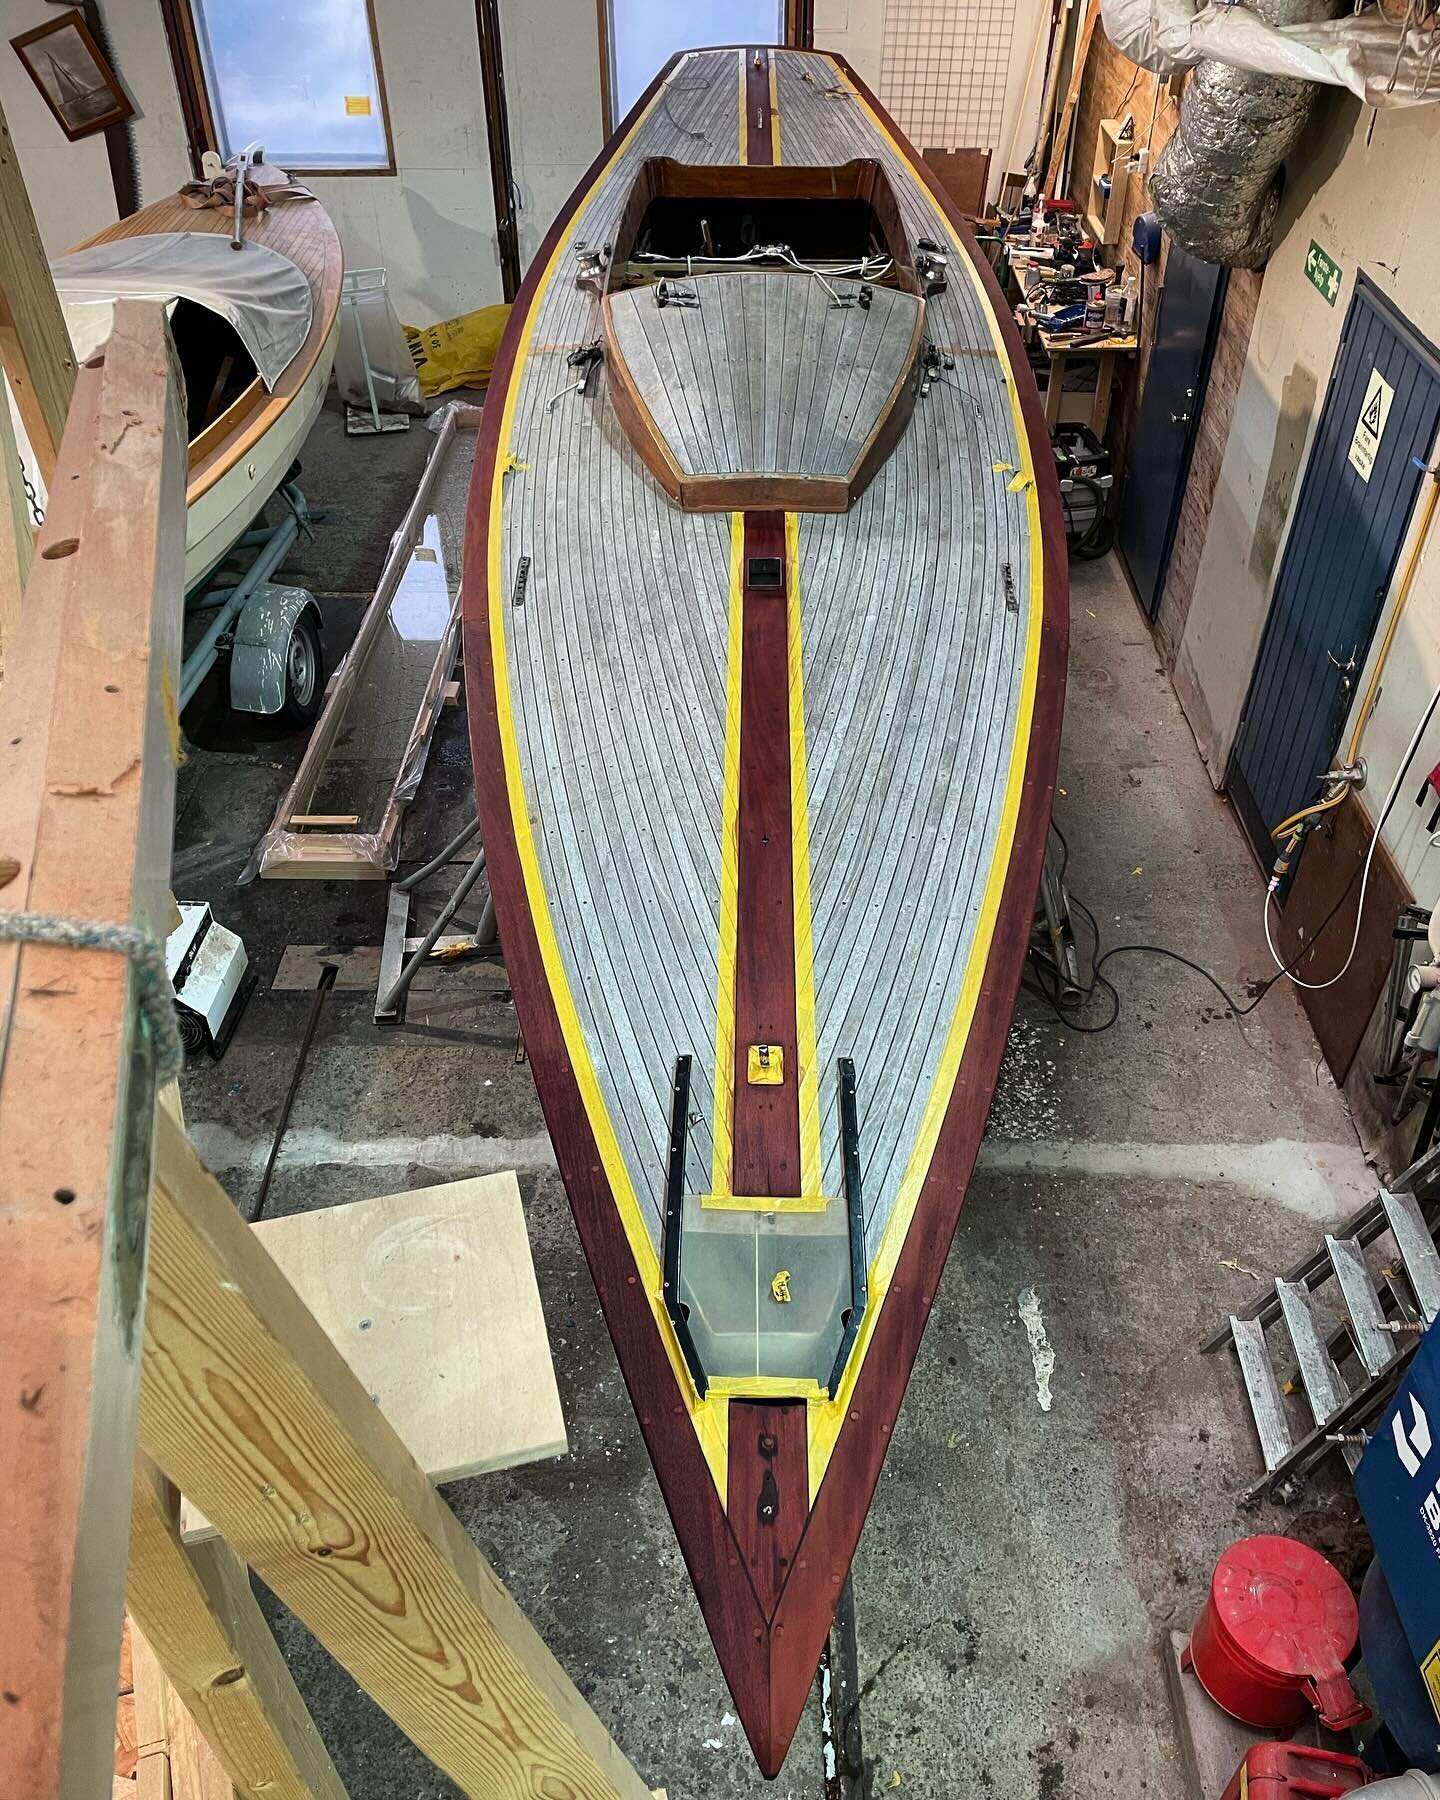 Two coats of stain on this International dragon class. 
&bull;
&bull;
&bull;
#woodenboat #boatbuilding #workshop #tools #restoration #sailing #dragonclass #dragon #diy #boat #wood #woodworking #oslo #explorepage #norway